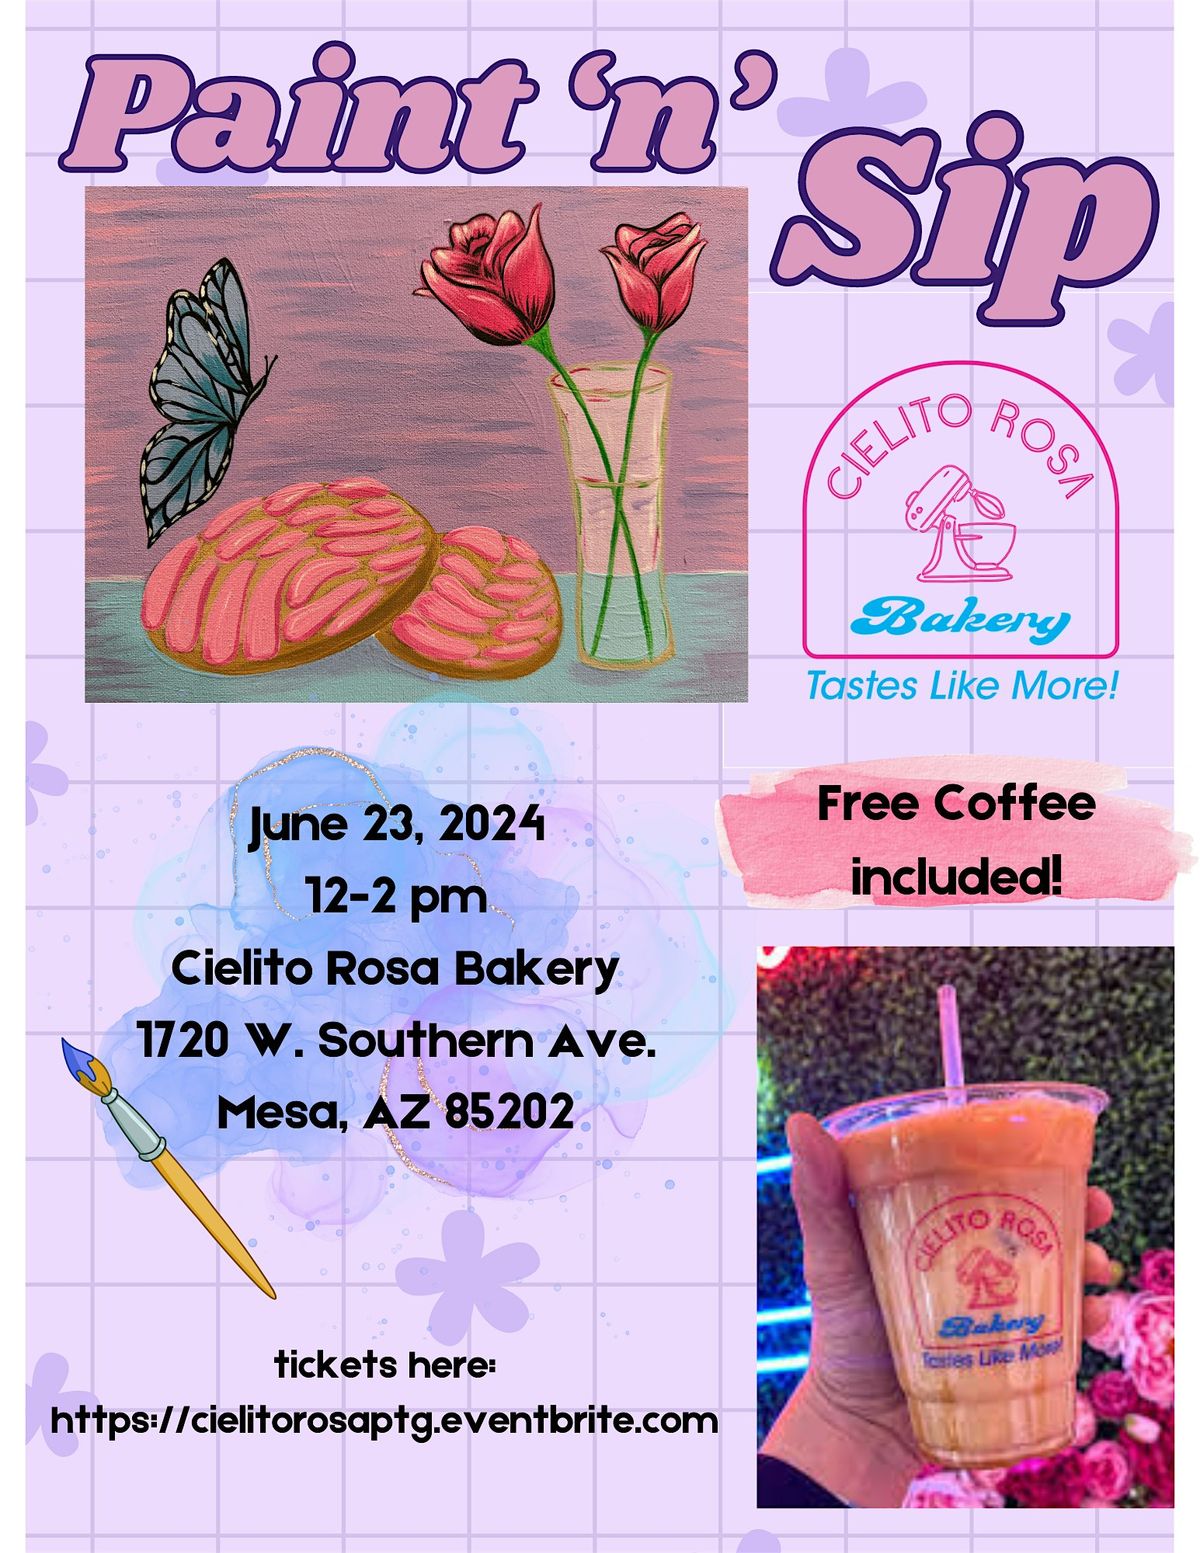 Paint 'n' Sip at Cielito Rosa Bakery and Cafe!